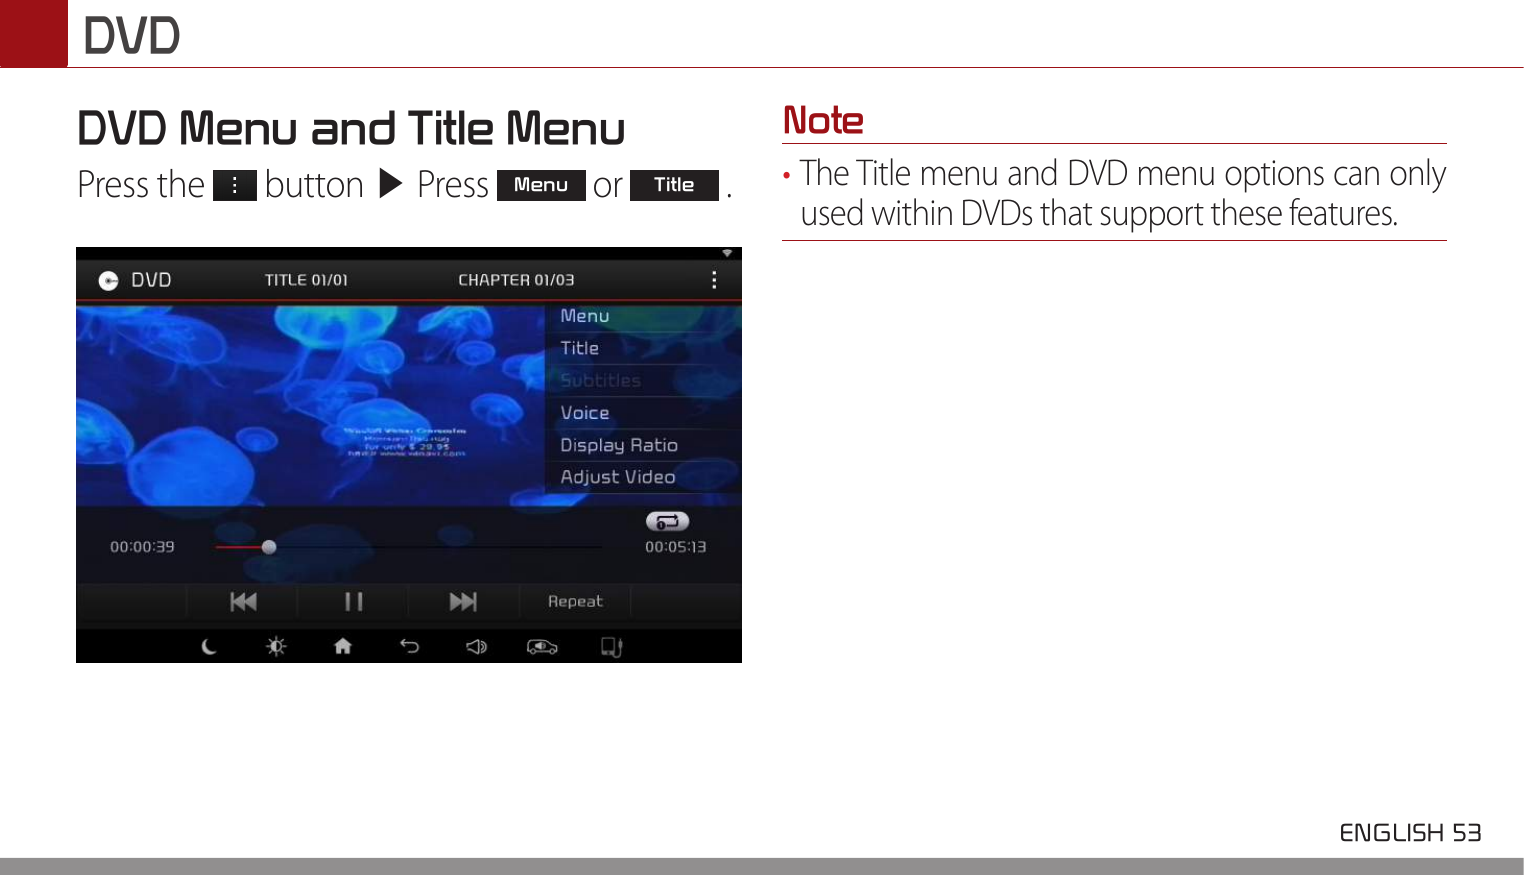  ENGLISH 53 DVDDVD Menu and Title MenuPress the   button ▶ Press Menu or Title .Note• The Title menu and DVD menu options can only used within DVDs that support these features. 